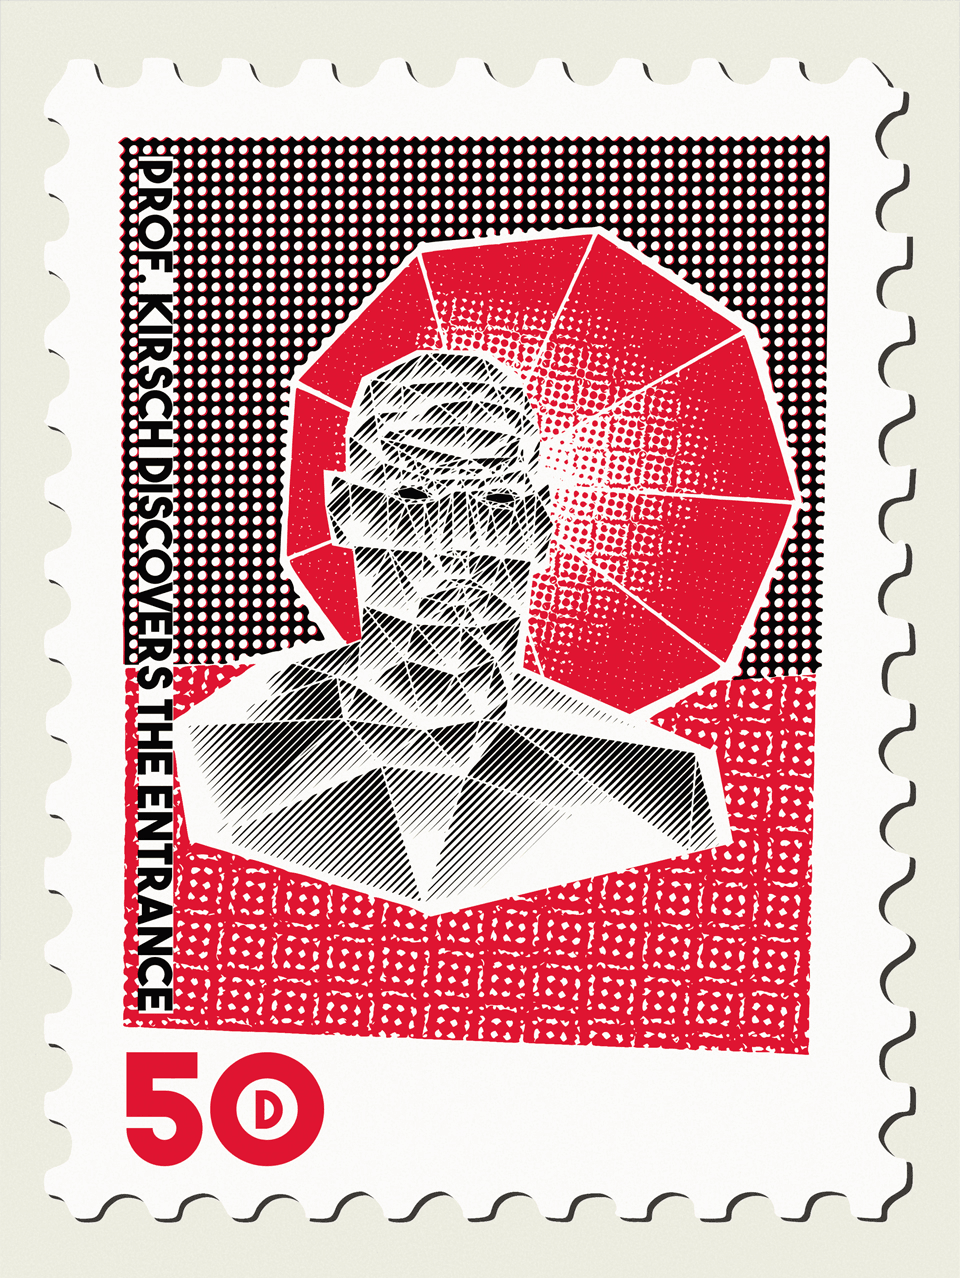 Nr. 350 - The Entrance, a stamp